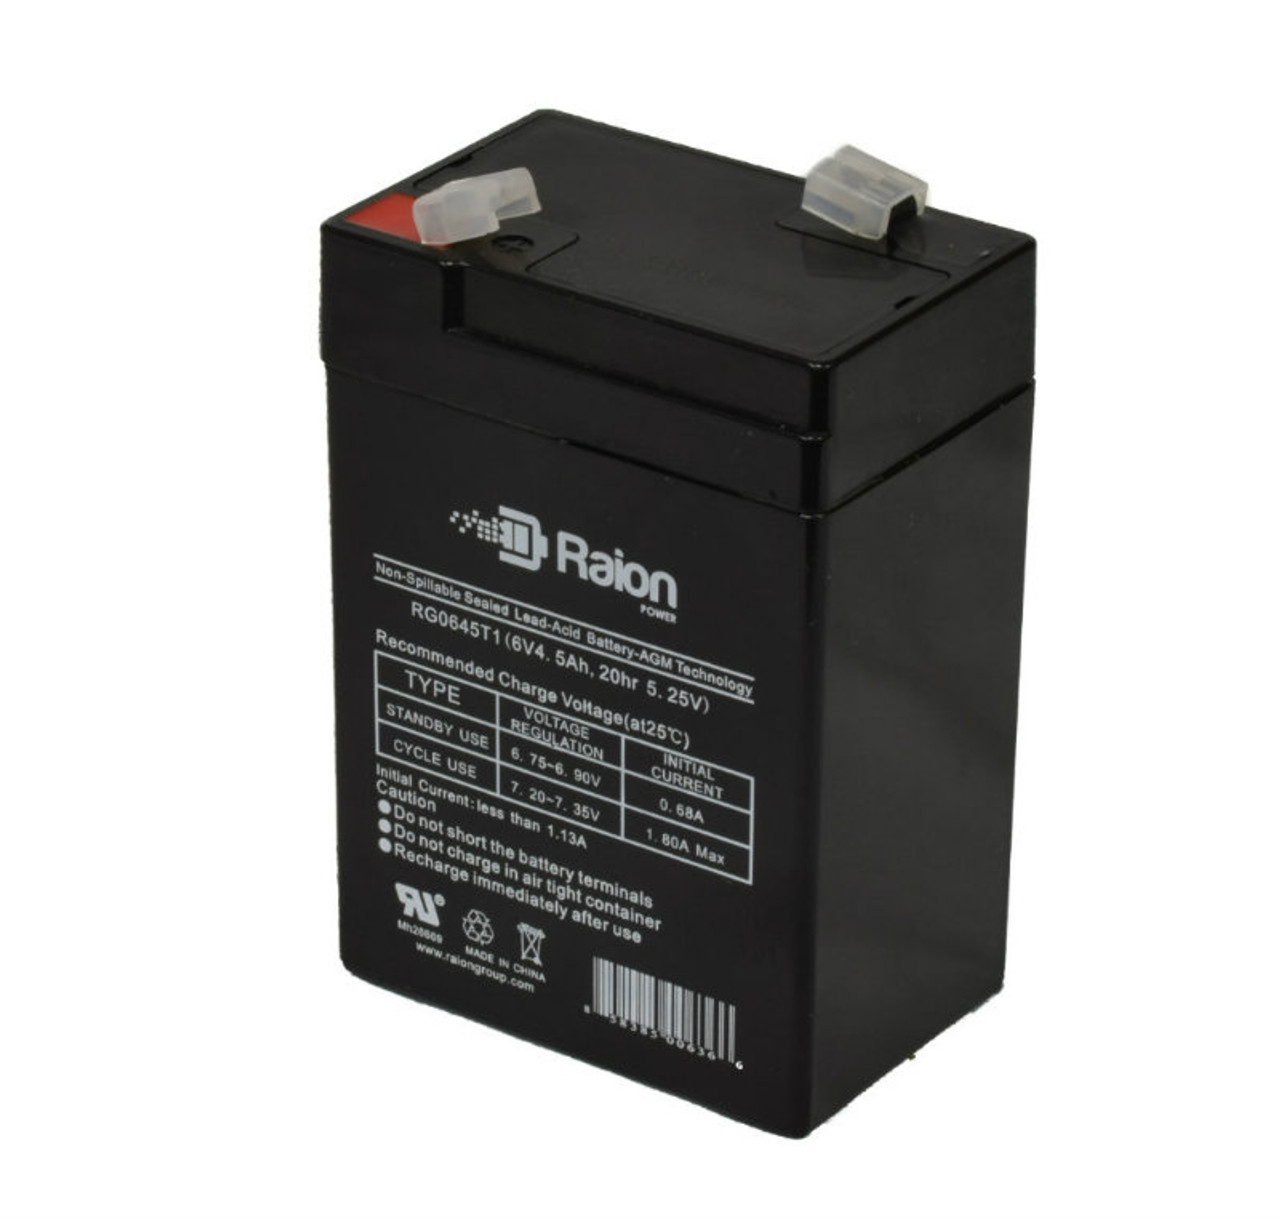 Raion Power RG0645T1 6V 4.5Ah Replacement Battery Cartridge for Kung Long WP4-6